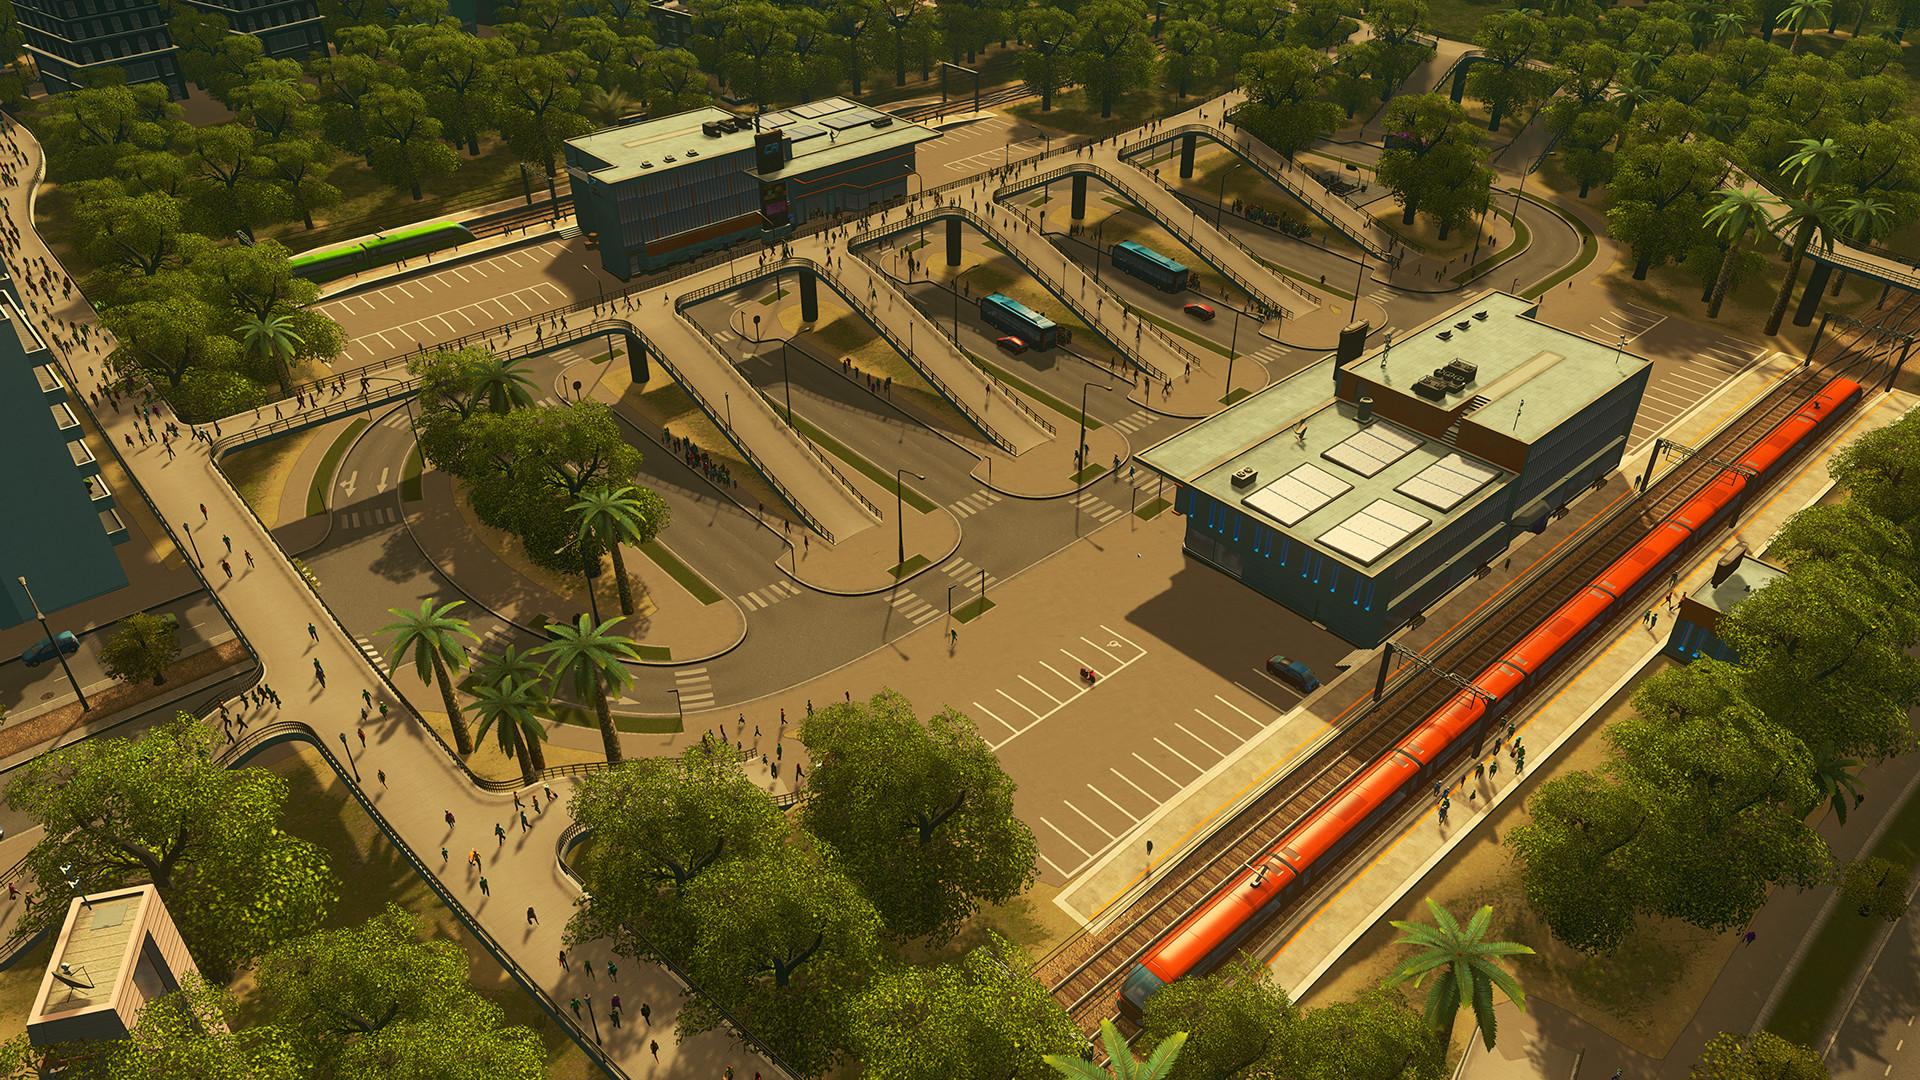 Screenshot №5 from game Cities: Skylines